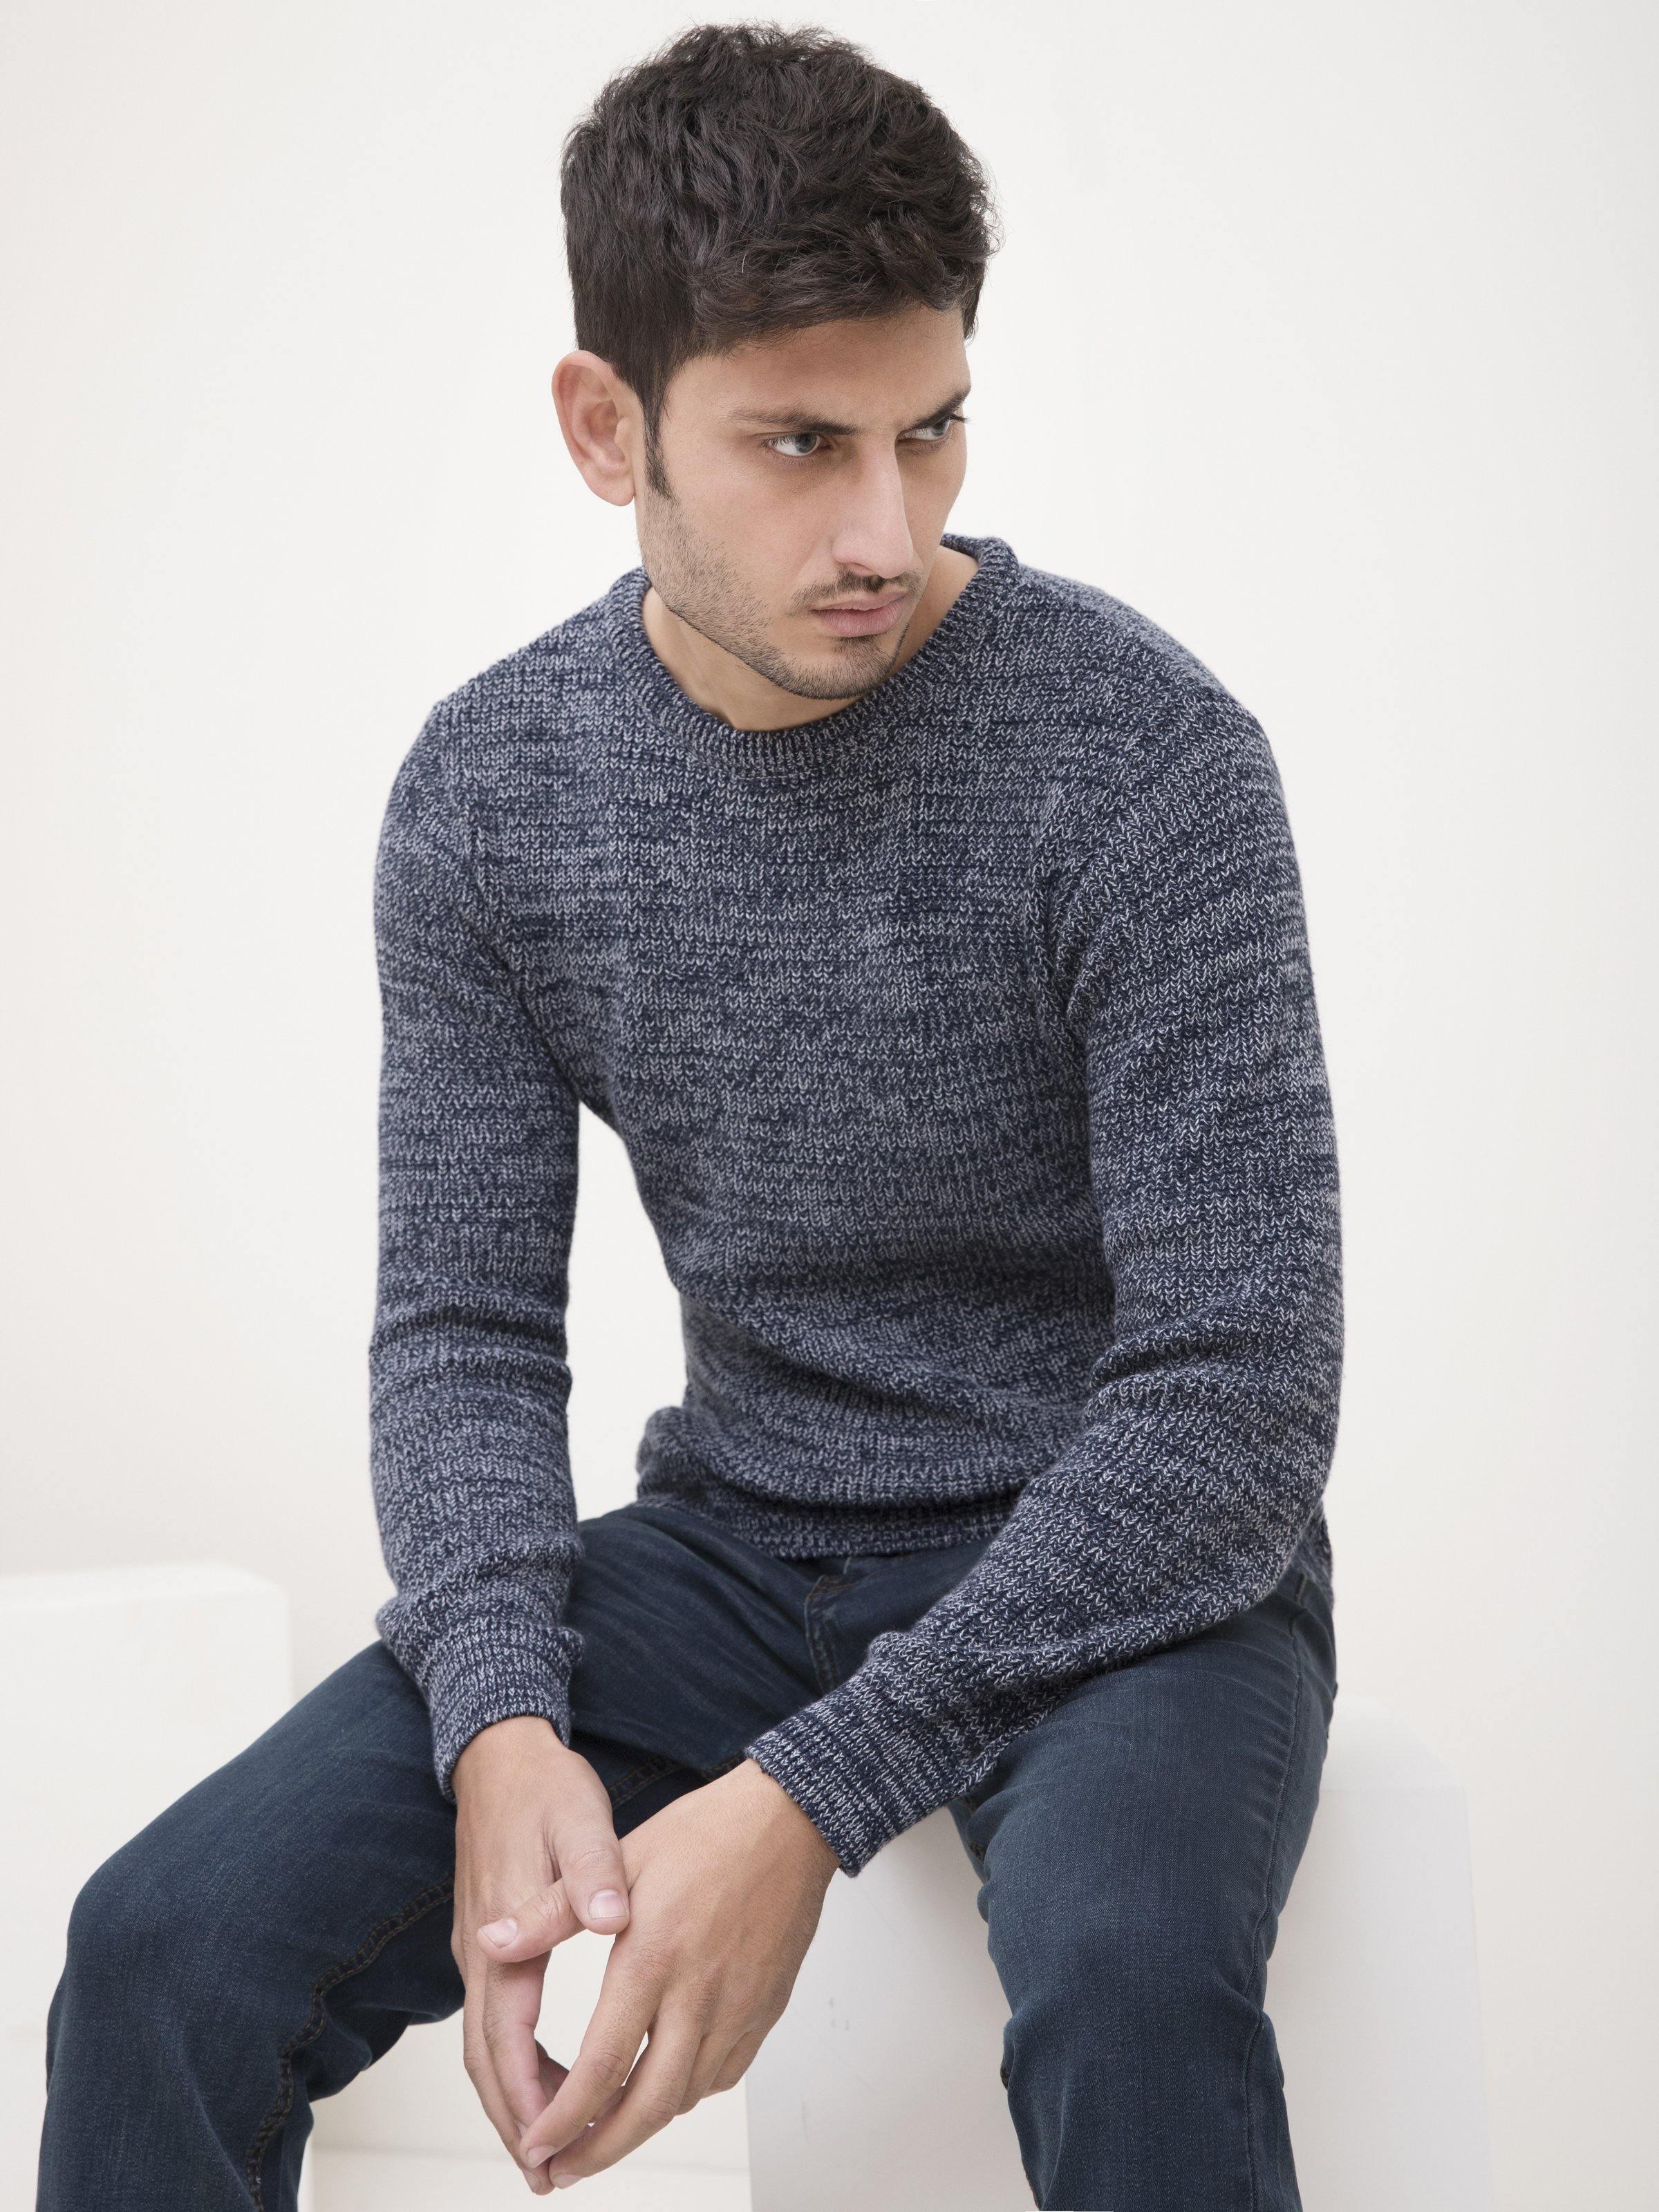 SWEATER CREW NECK FULL SLEEVE NAVY GREY at Charcoal Clothing